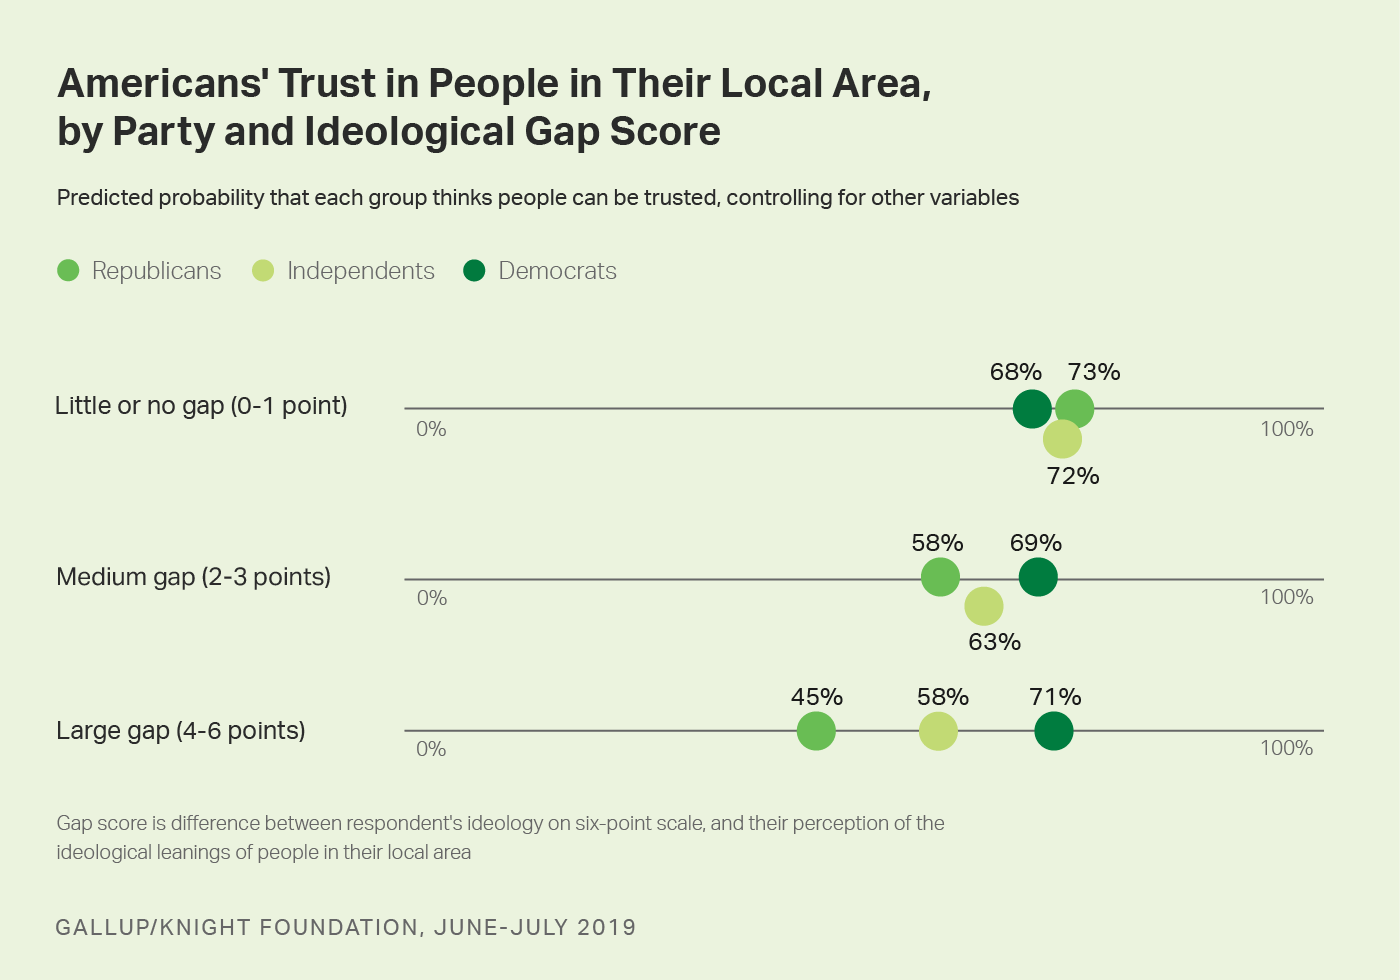 Chart showing % of political party groups who trust their neighbors, by ideological gap score (own vs. communities’ ideology).